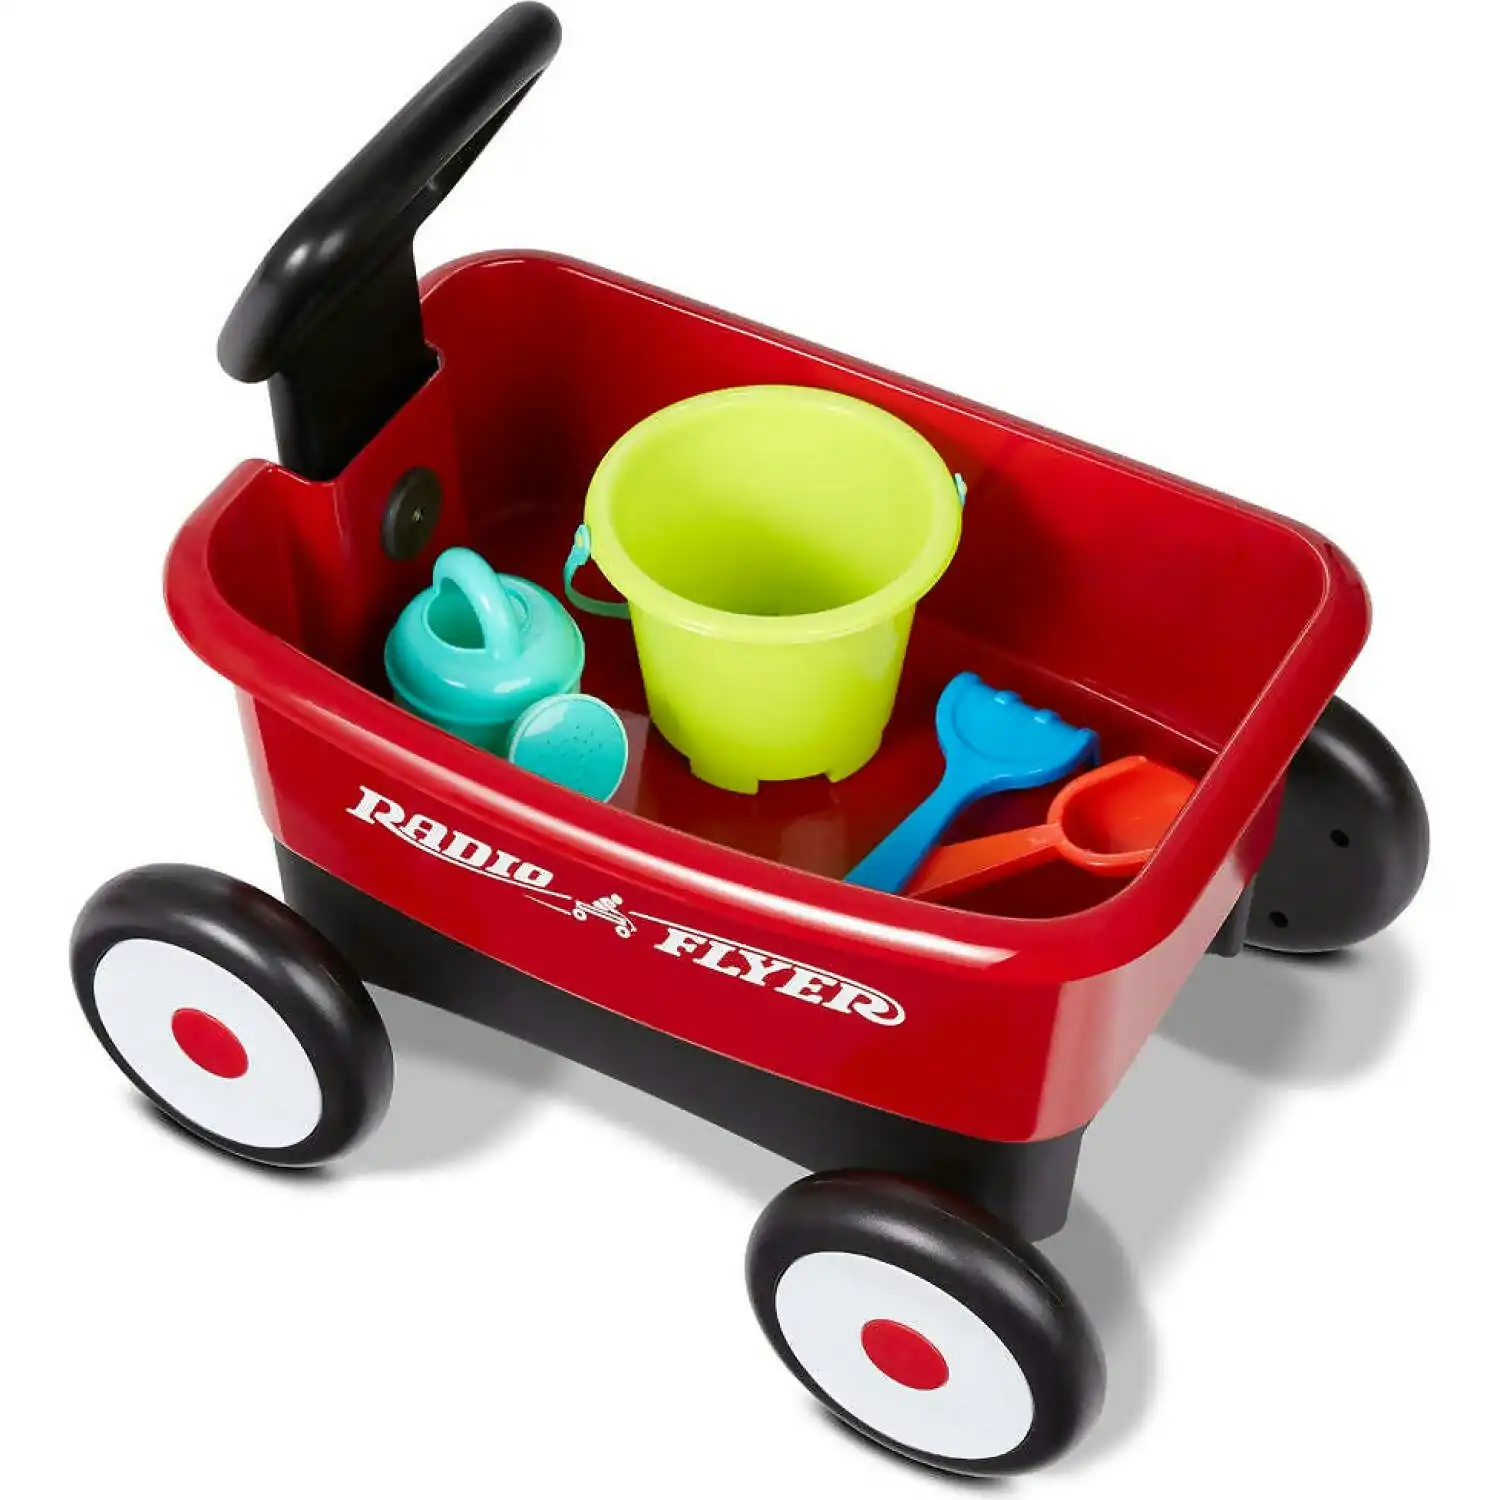 Radio Flyer - My 1st 2-in-1 Wagon With Garden Tools